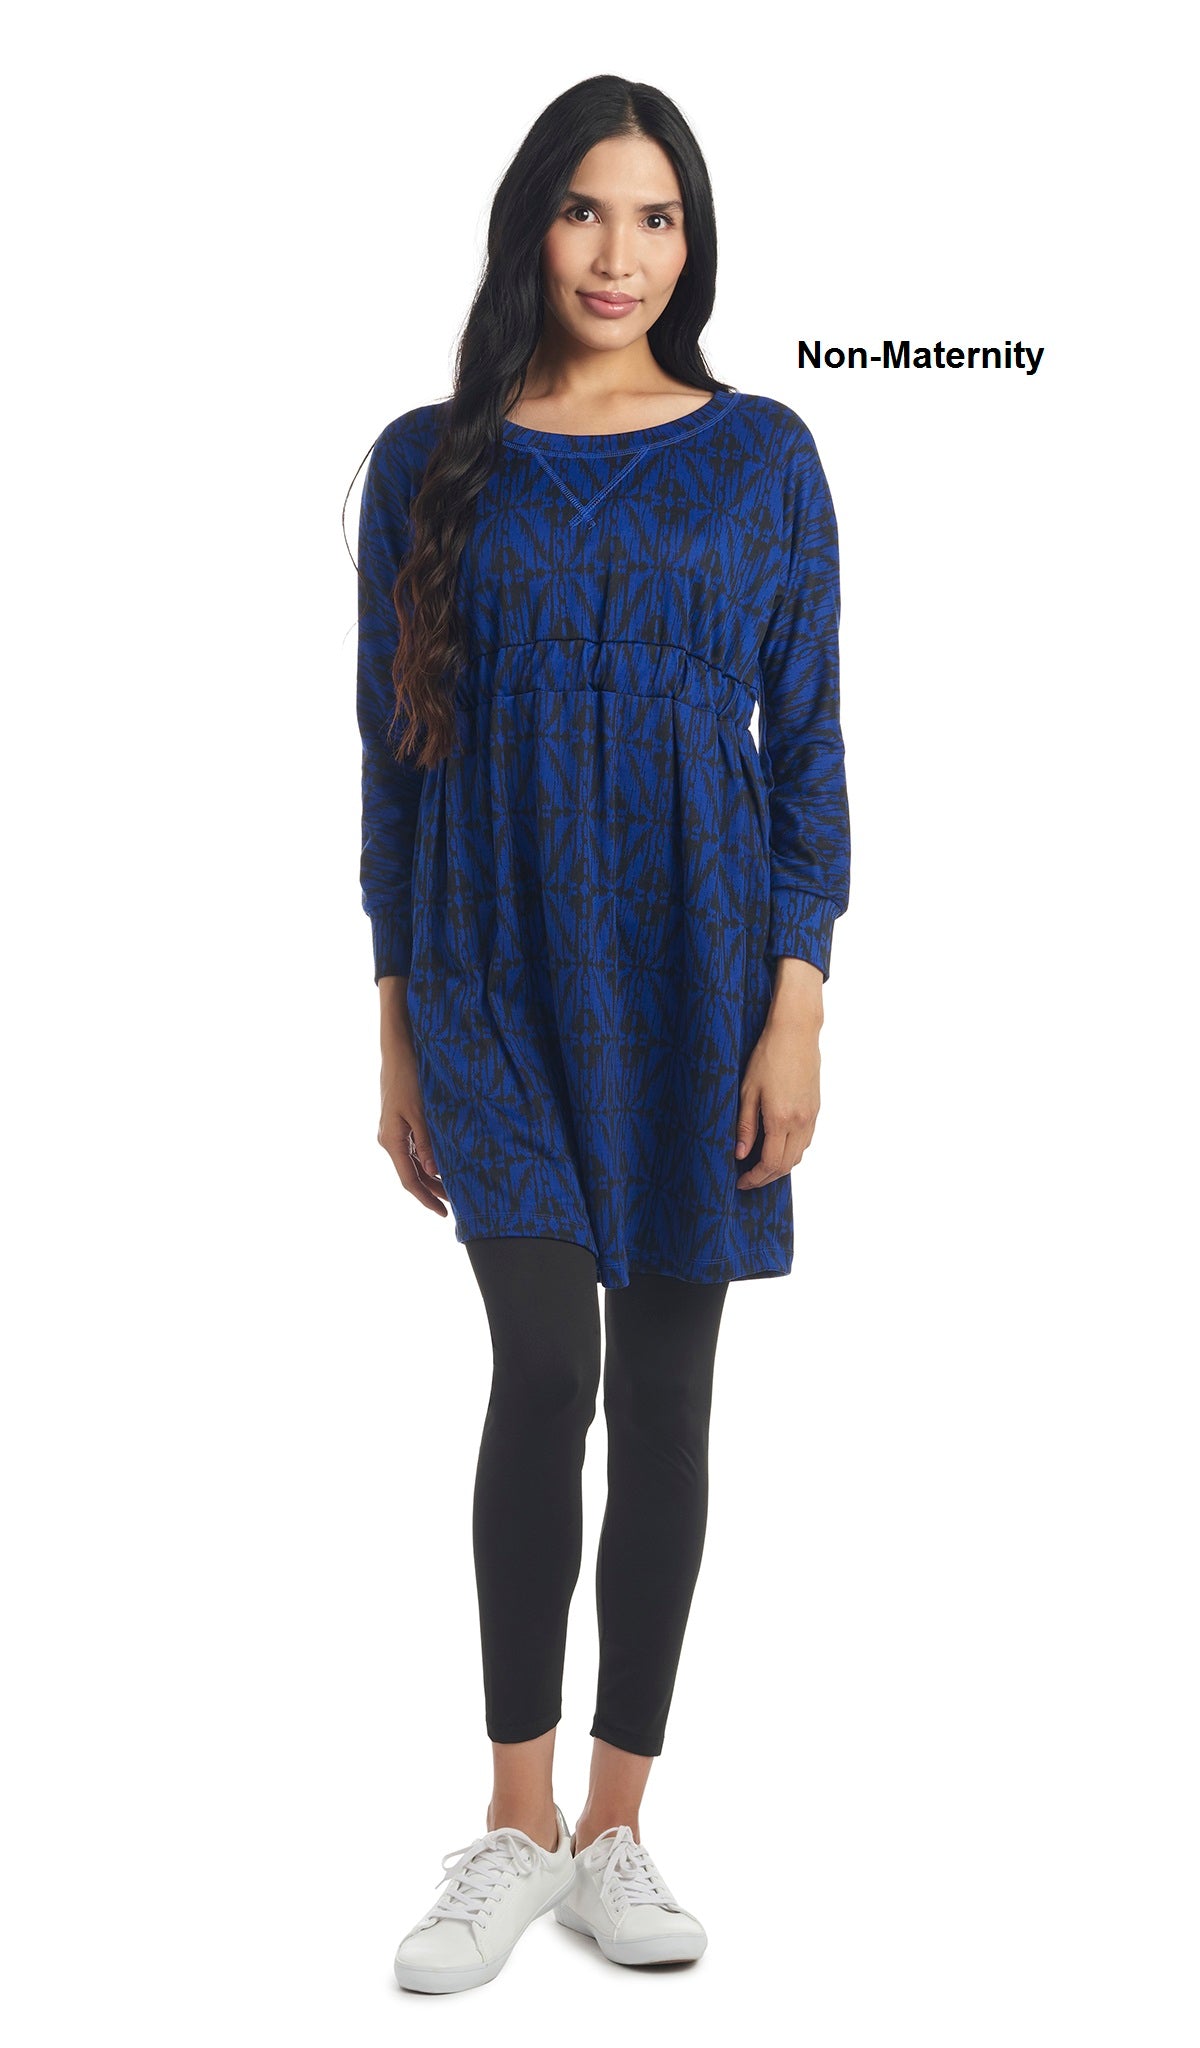 Ikat Saspphire Carter dress worn by woman as non-maternity style over leggings.